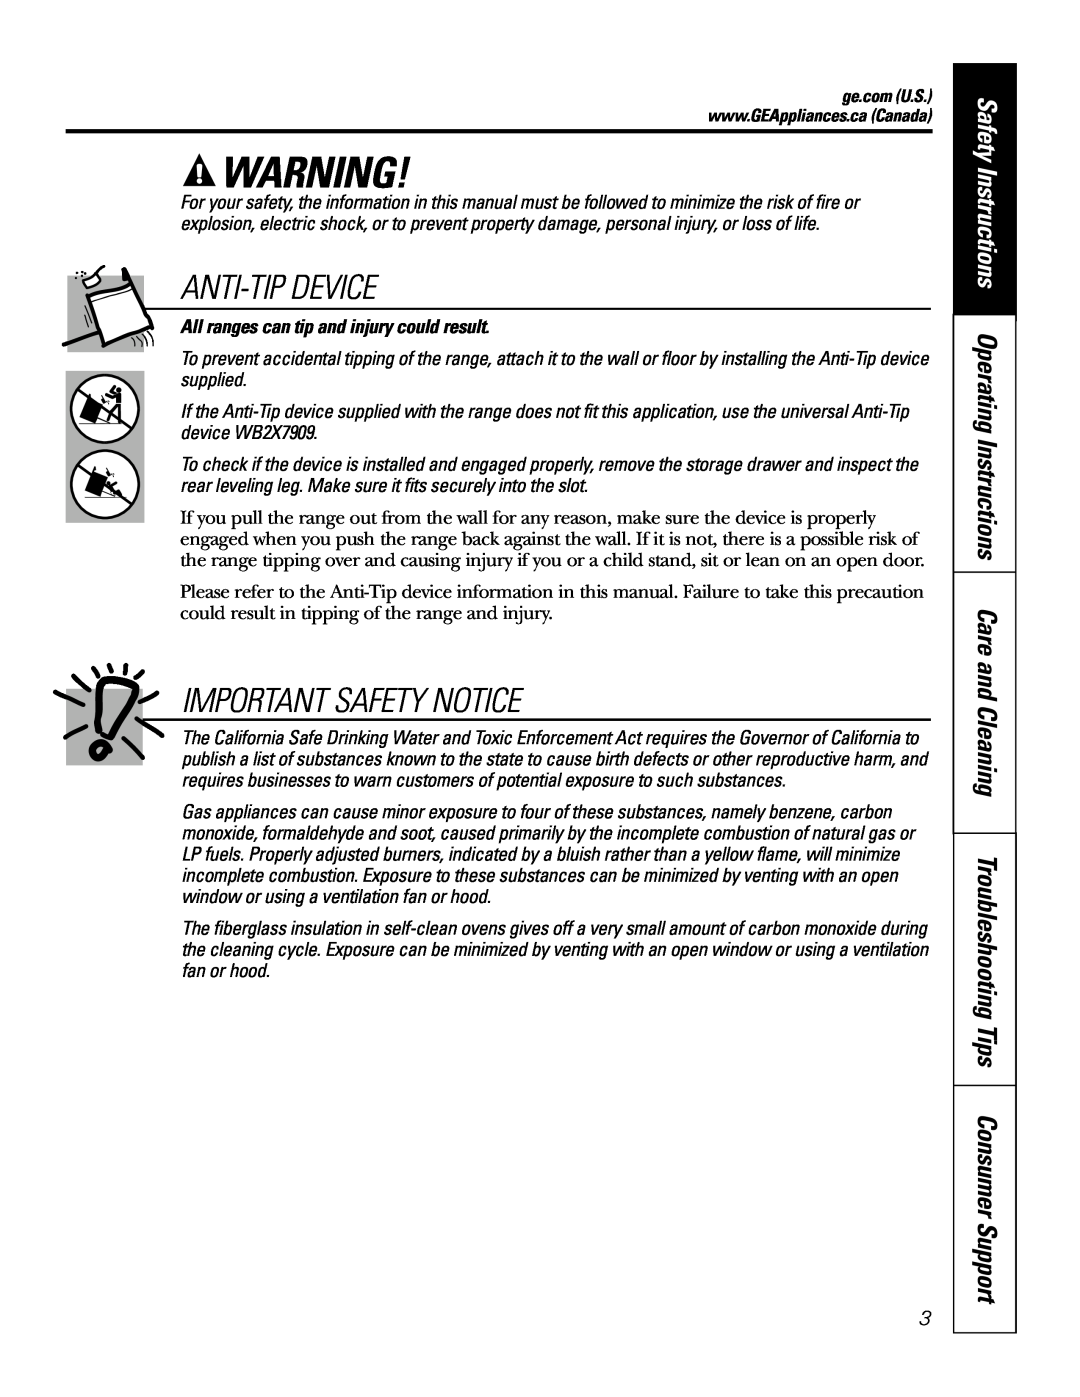 GE PGS968 owner manual Important Safety Notice, Anti-Tipdevice, All ranges can tip and injury could result 